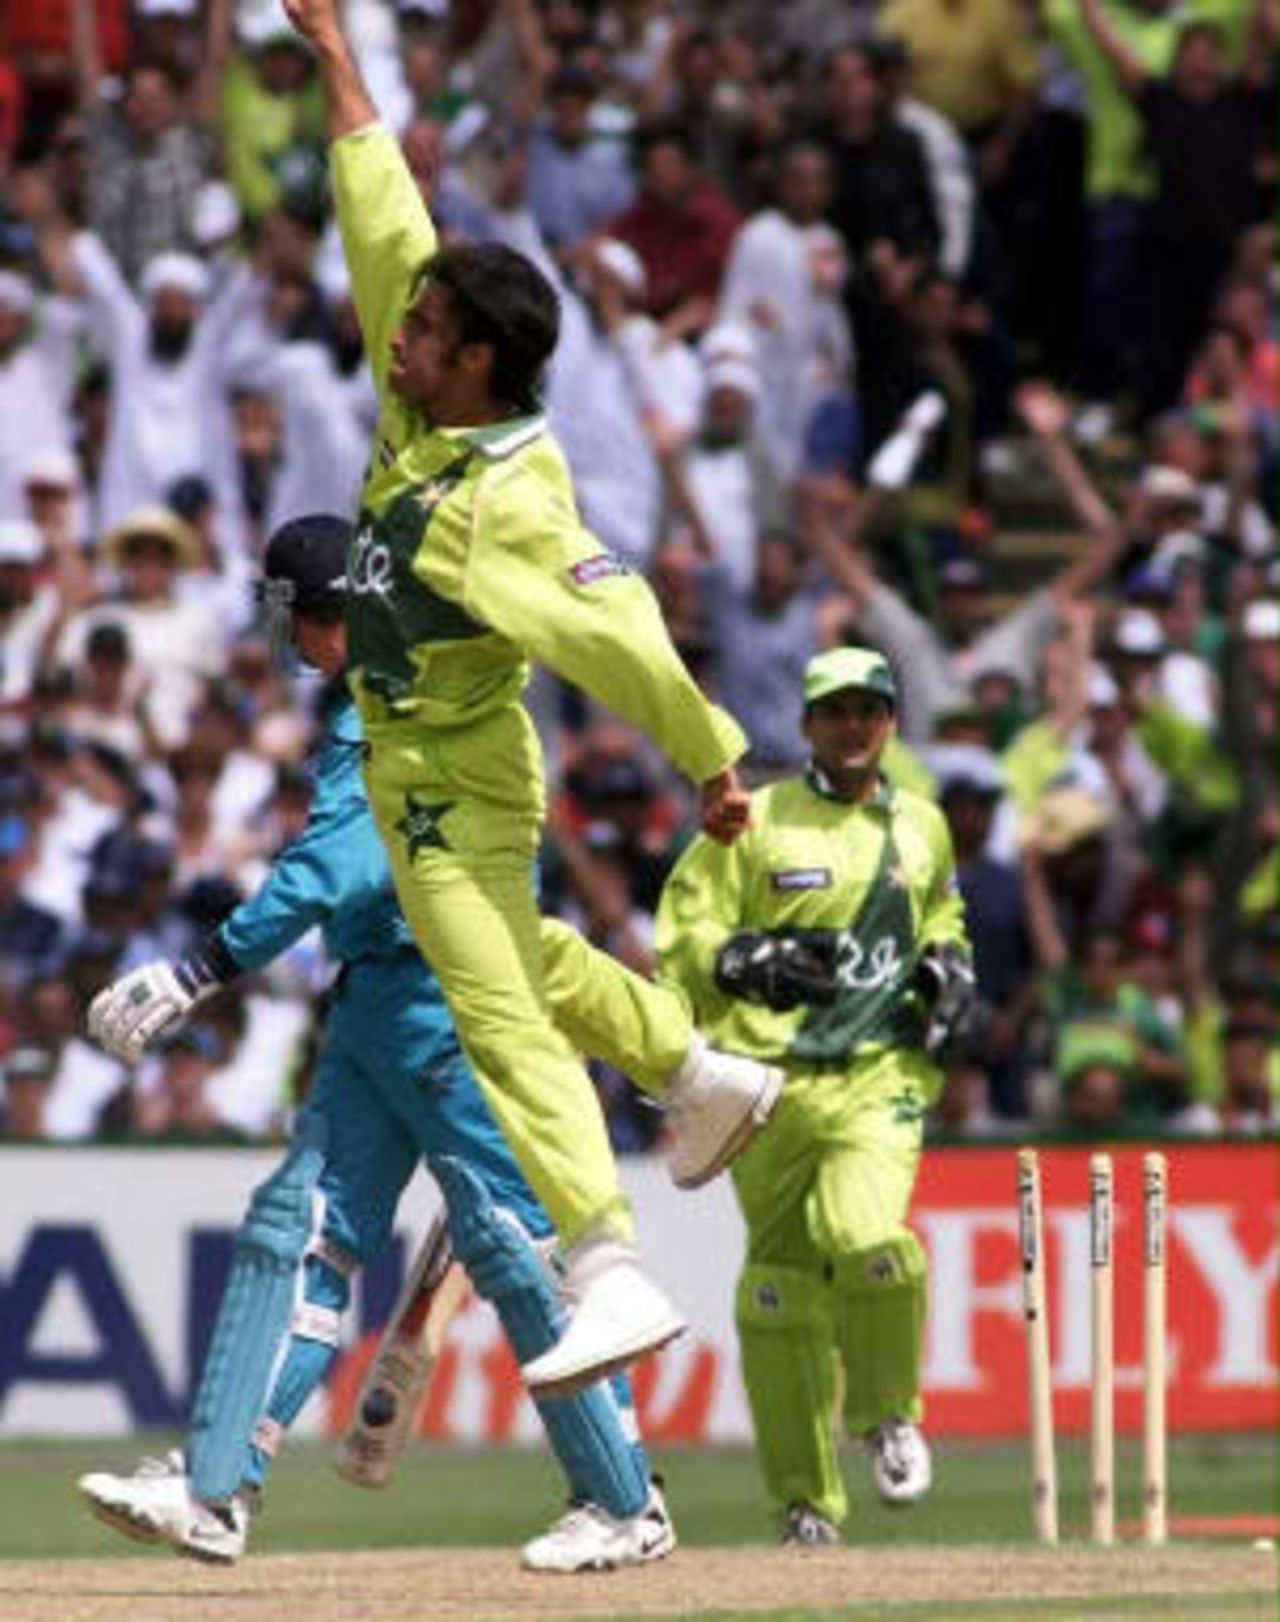 Shoaib Akhtar (Center) celebrates the wicket of New Zealand's Chris Harris during the Cricket World Cup Semi Final at Old Trafford, Manchester, 16 June 1999